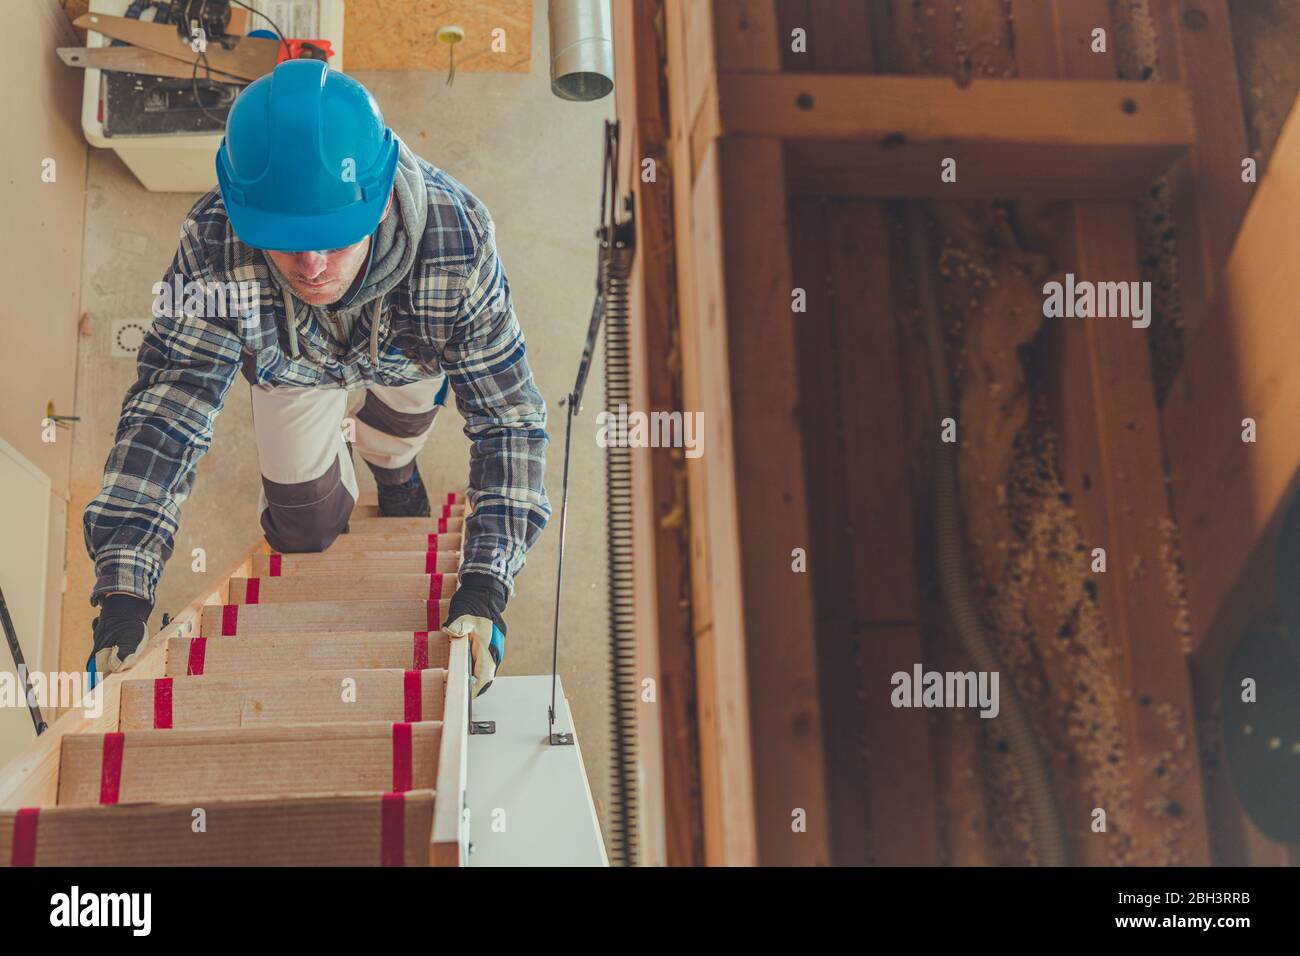 Construction Contractor Climbing Up Unfinished Steps To Access Upper Floor Of Building. Stock Photo